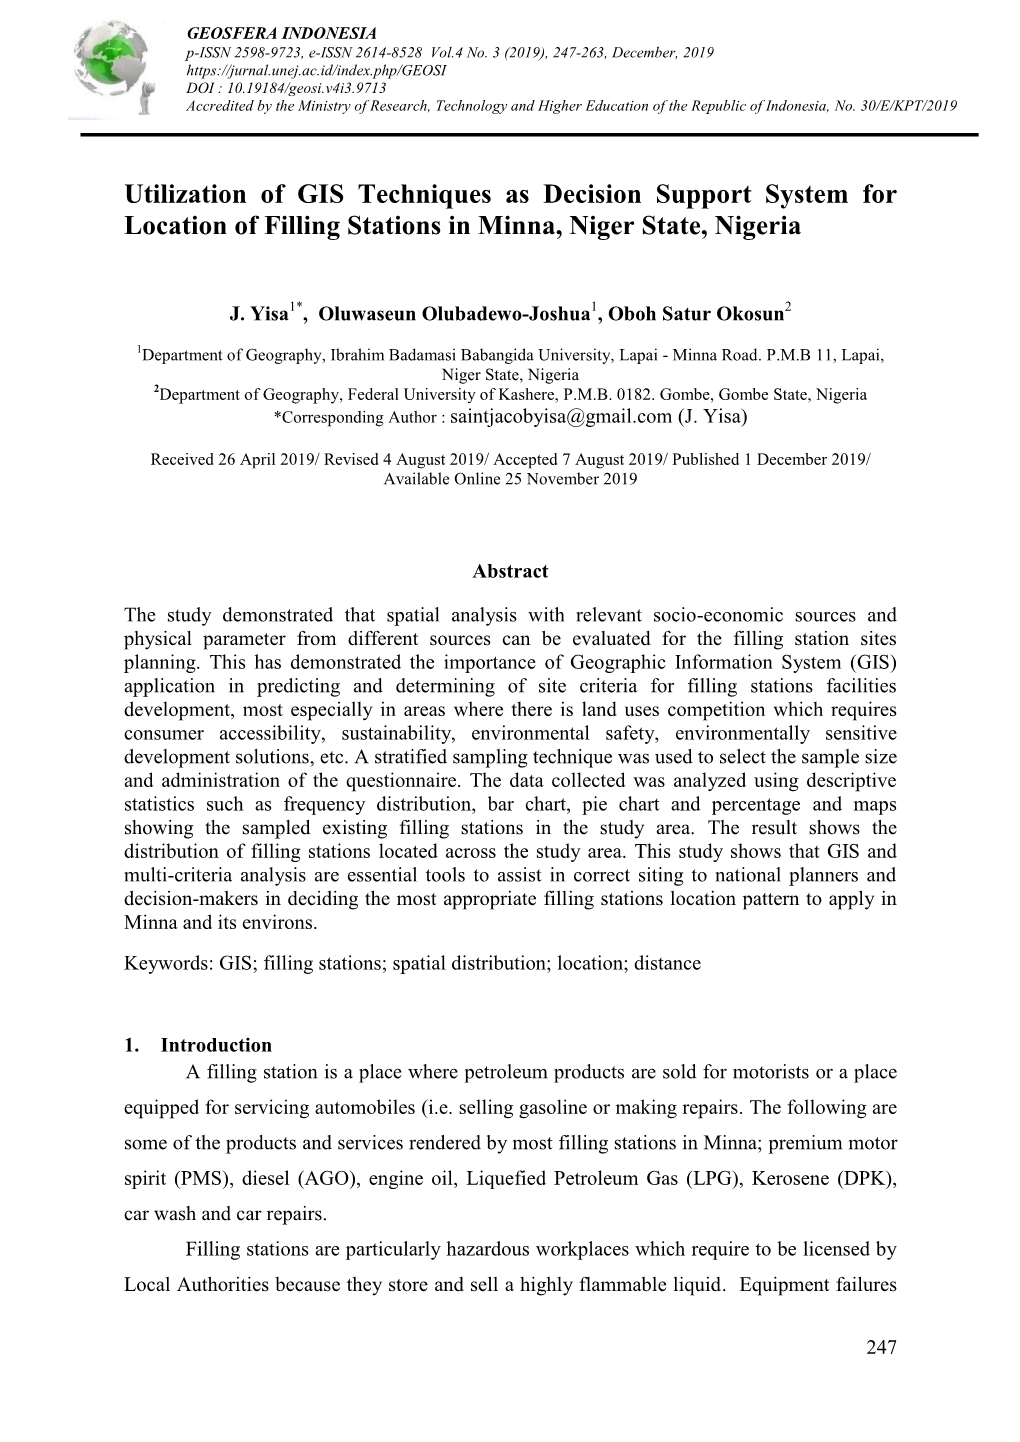 Utilization of GIS Techniques As Decision Support System for Location of Filling Stations in Minna, Niger State, Nigeria